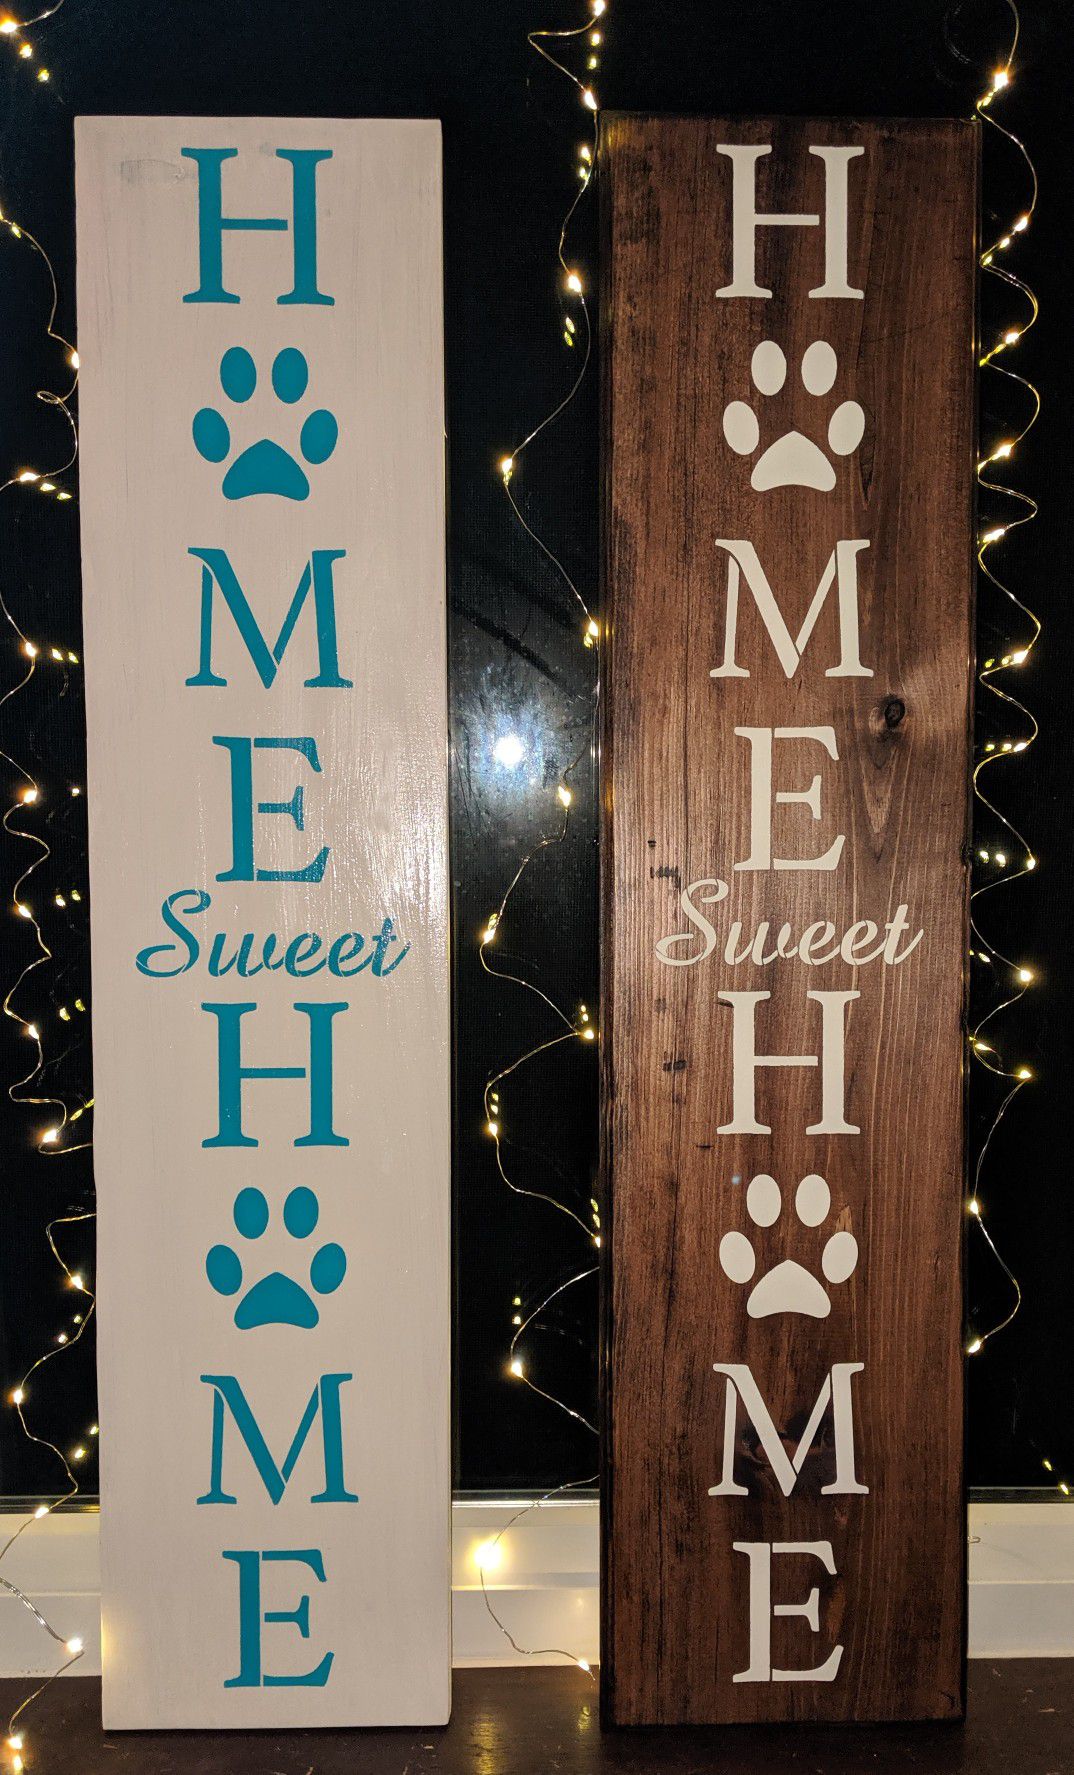 Home Sweet Home- Wood Sign With Paws Prints- Country Decor- 35"H x 7 1/2"W